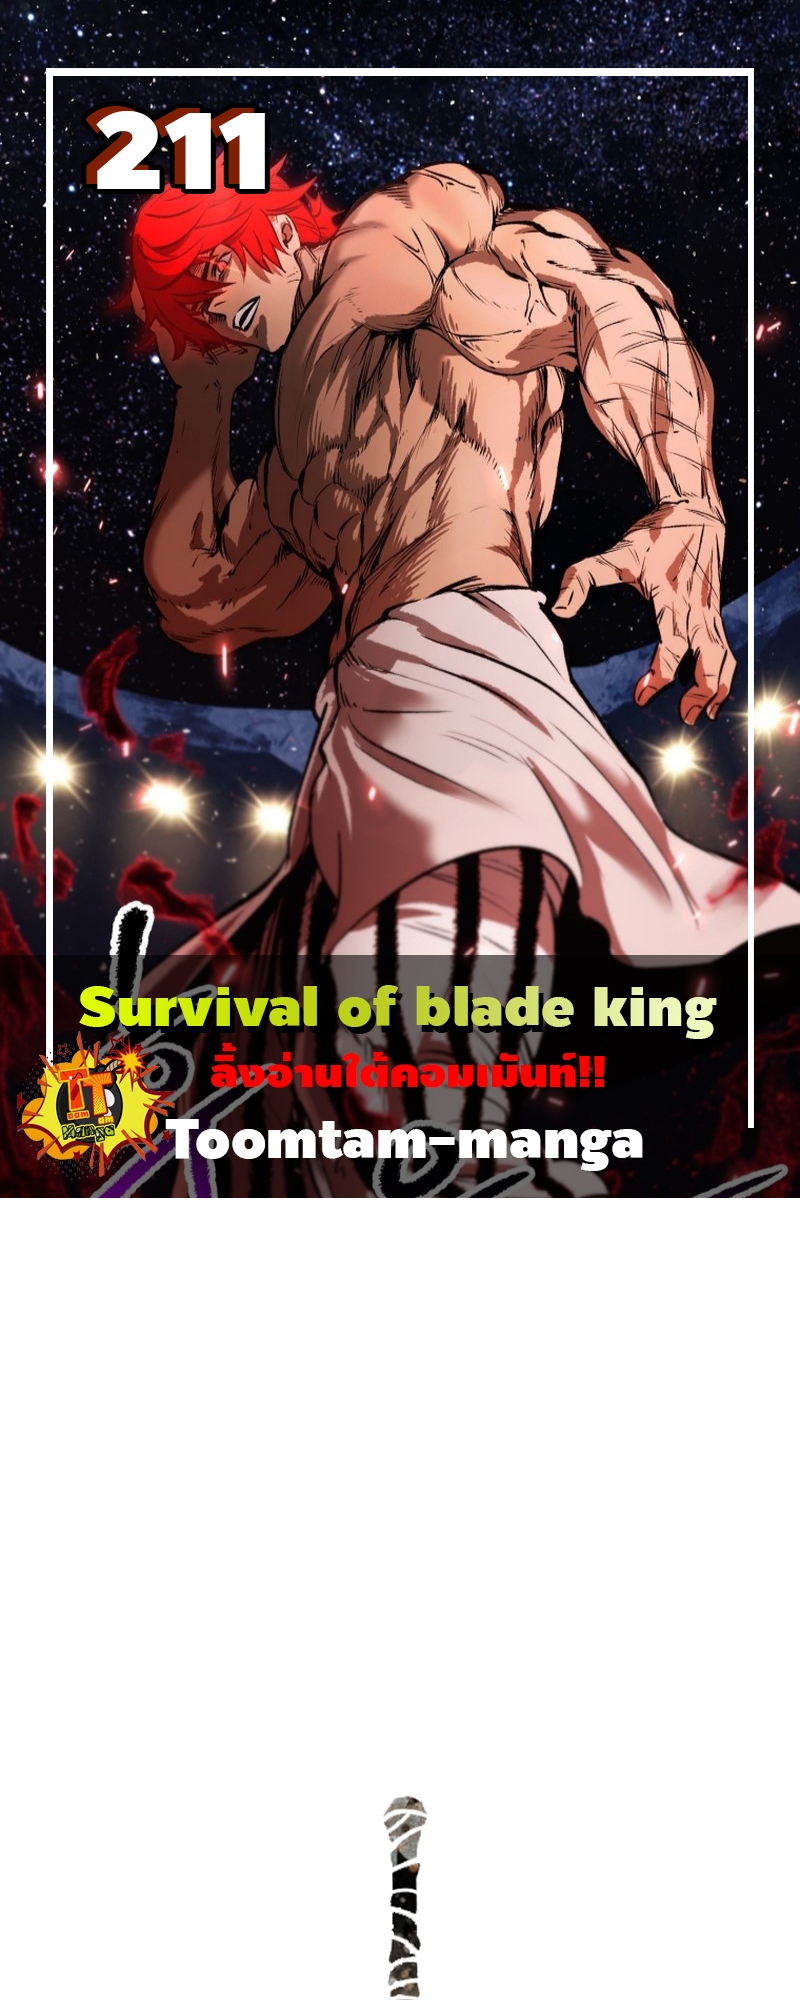 Survival of blade king 211 22 06 25670001